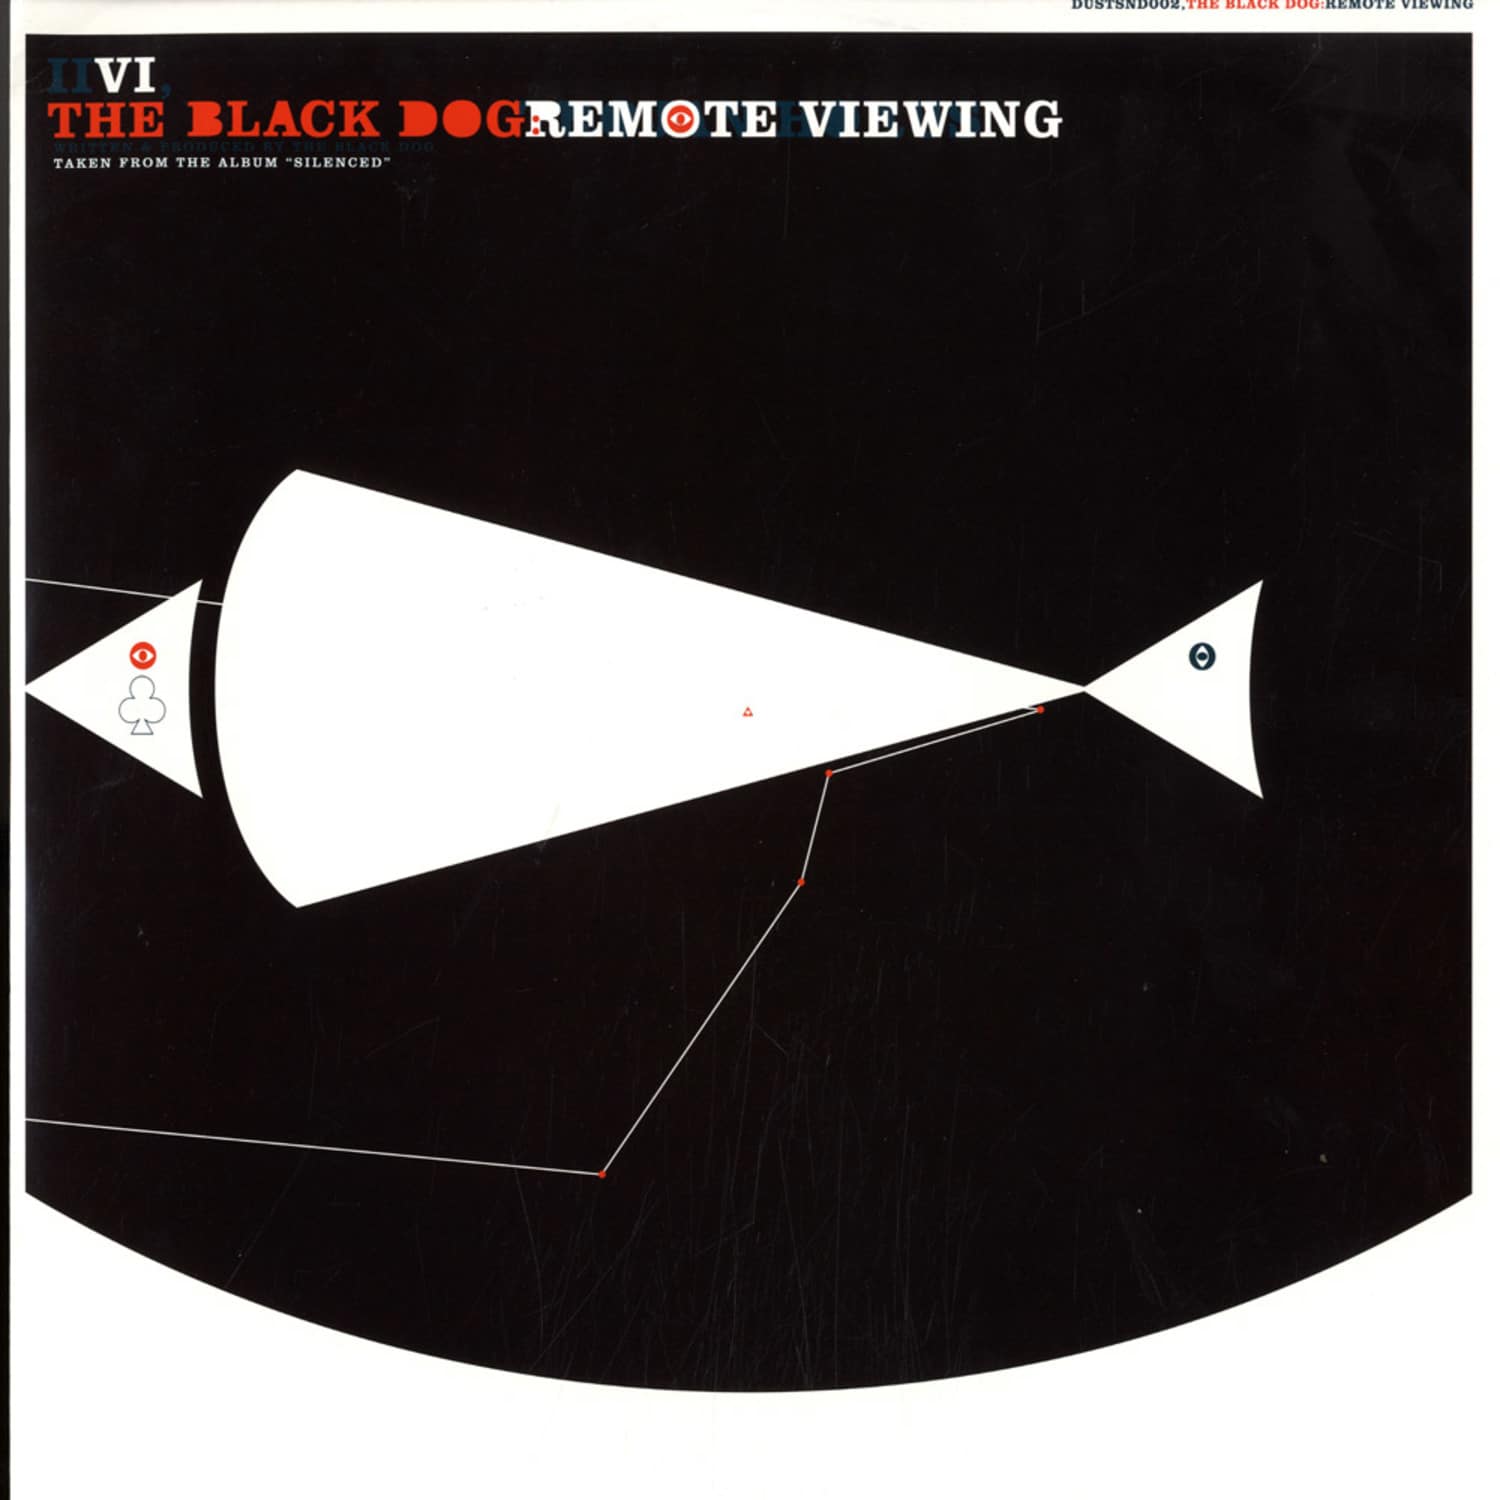 The Black Dog - REMOTE VIEWING